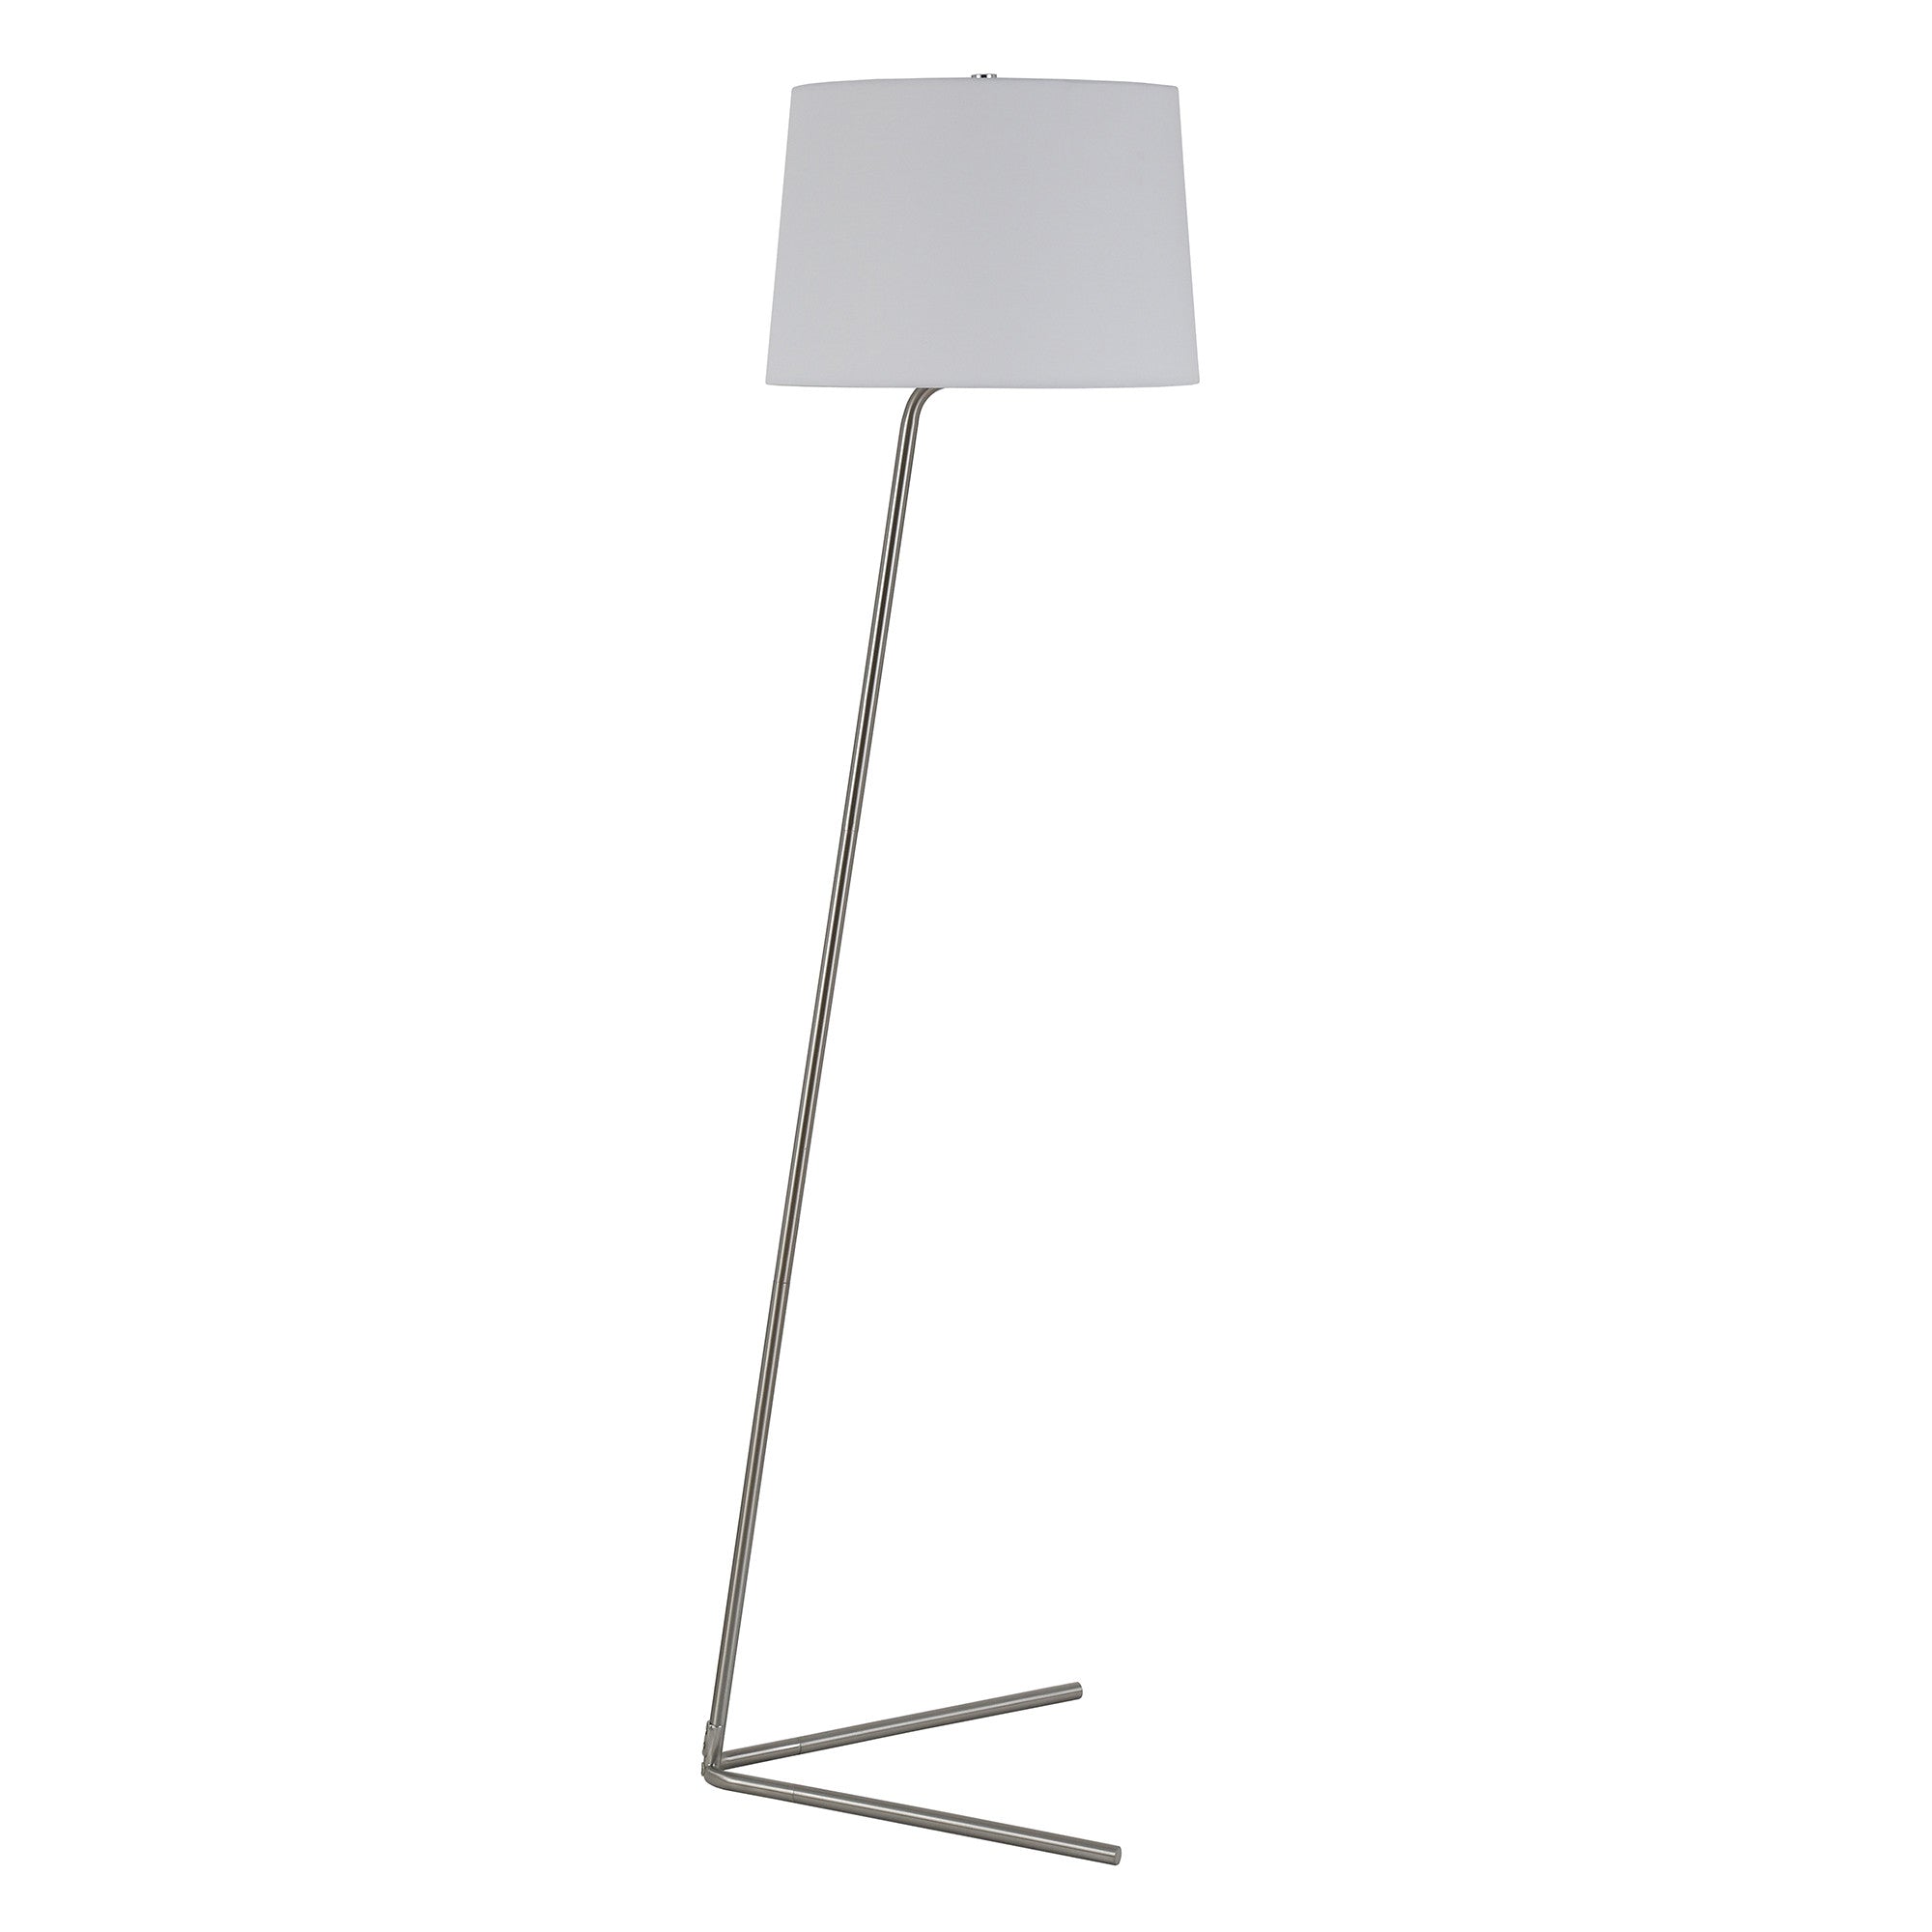 60" Nickel Novelty Floor Lamp With White Frosted Glass Drum Shade